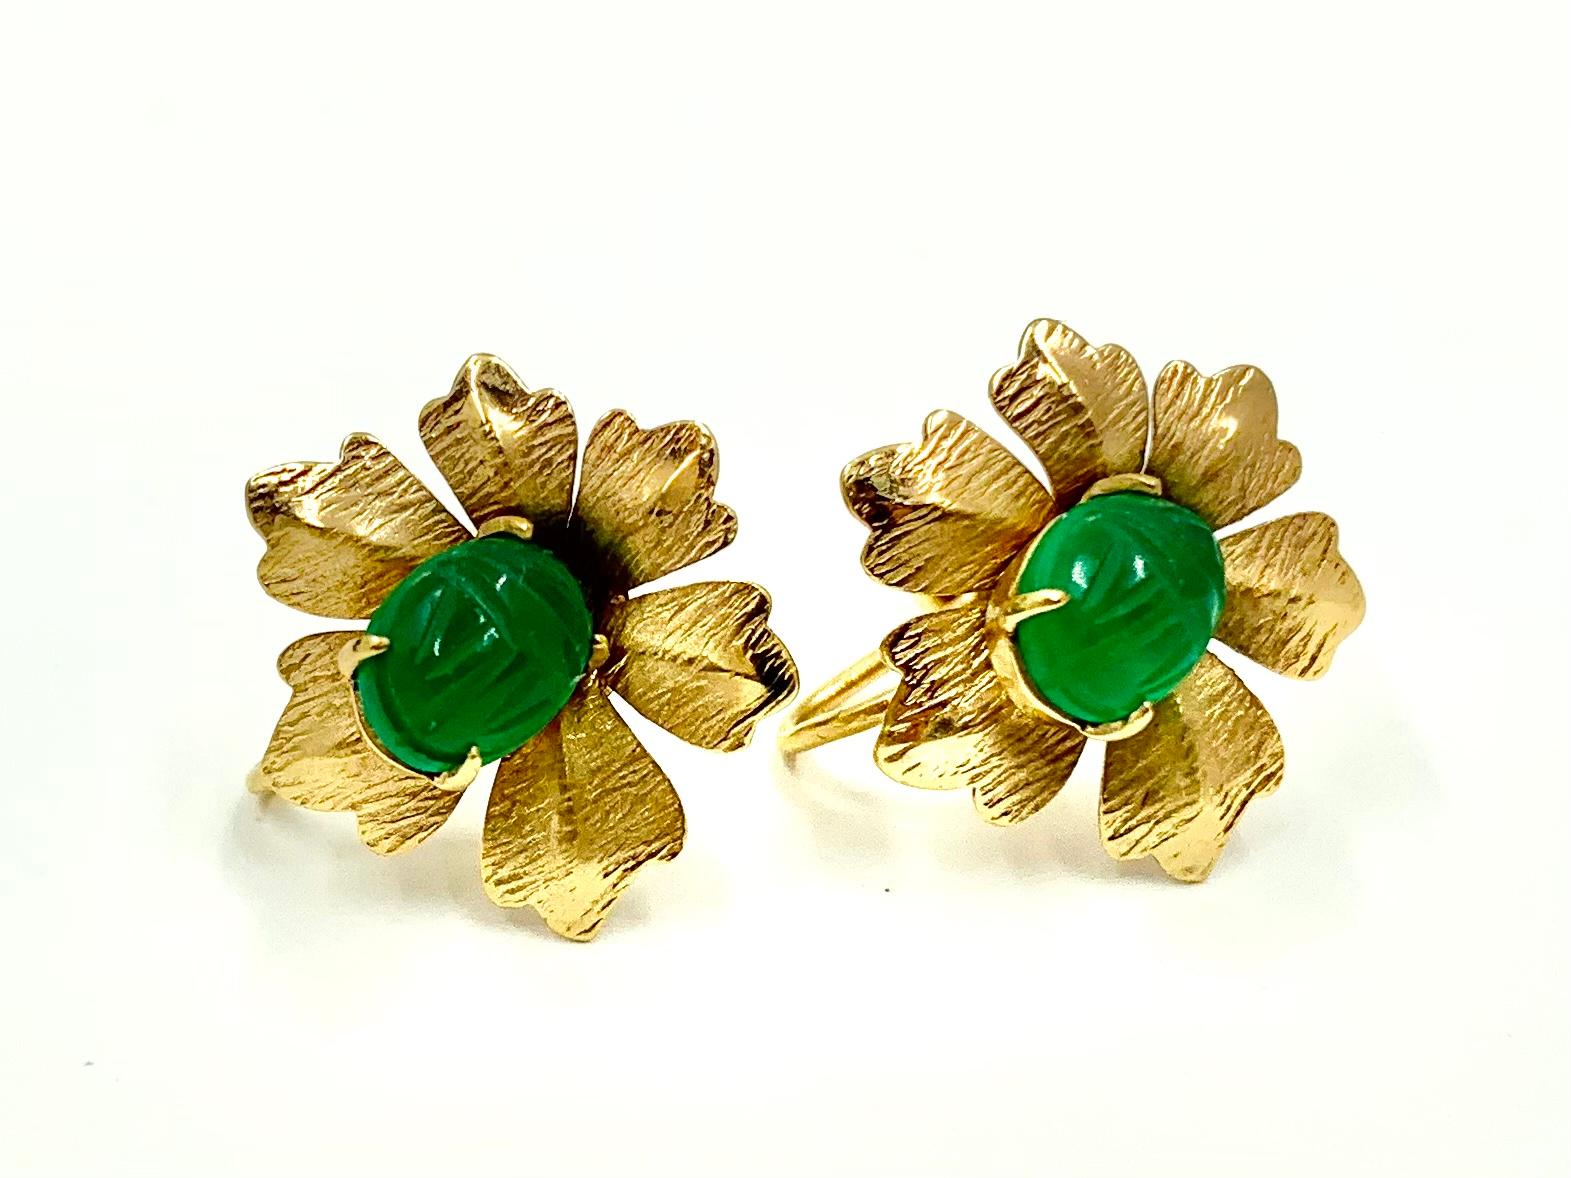 Carved green chrysoprase scarabs set on beautifully detailed 14K textured yellow gold flowers.
The backs with original screw-back closure.
Ancient Egyptians revered the scarab as a symbol of transformation, immortality and protection. 
A classic